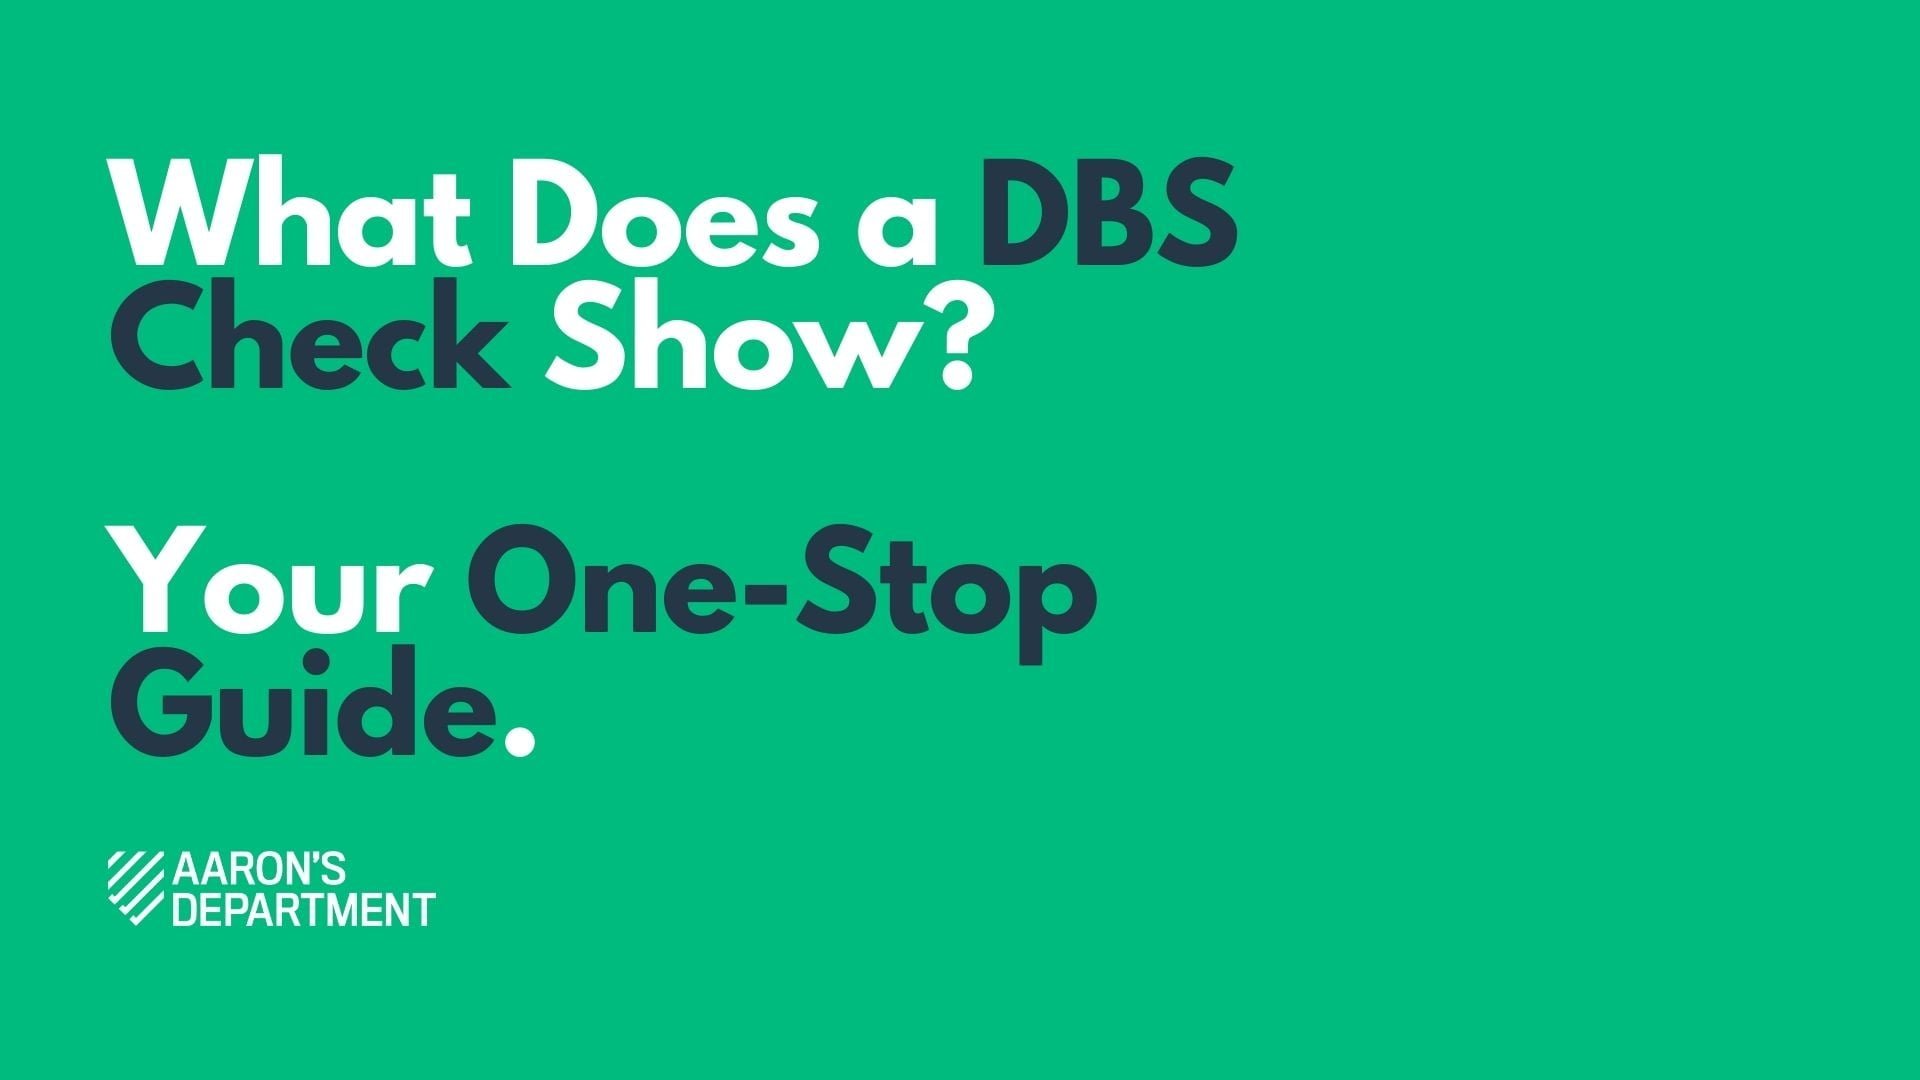 what does a dbs check show?